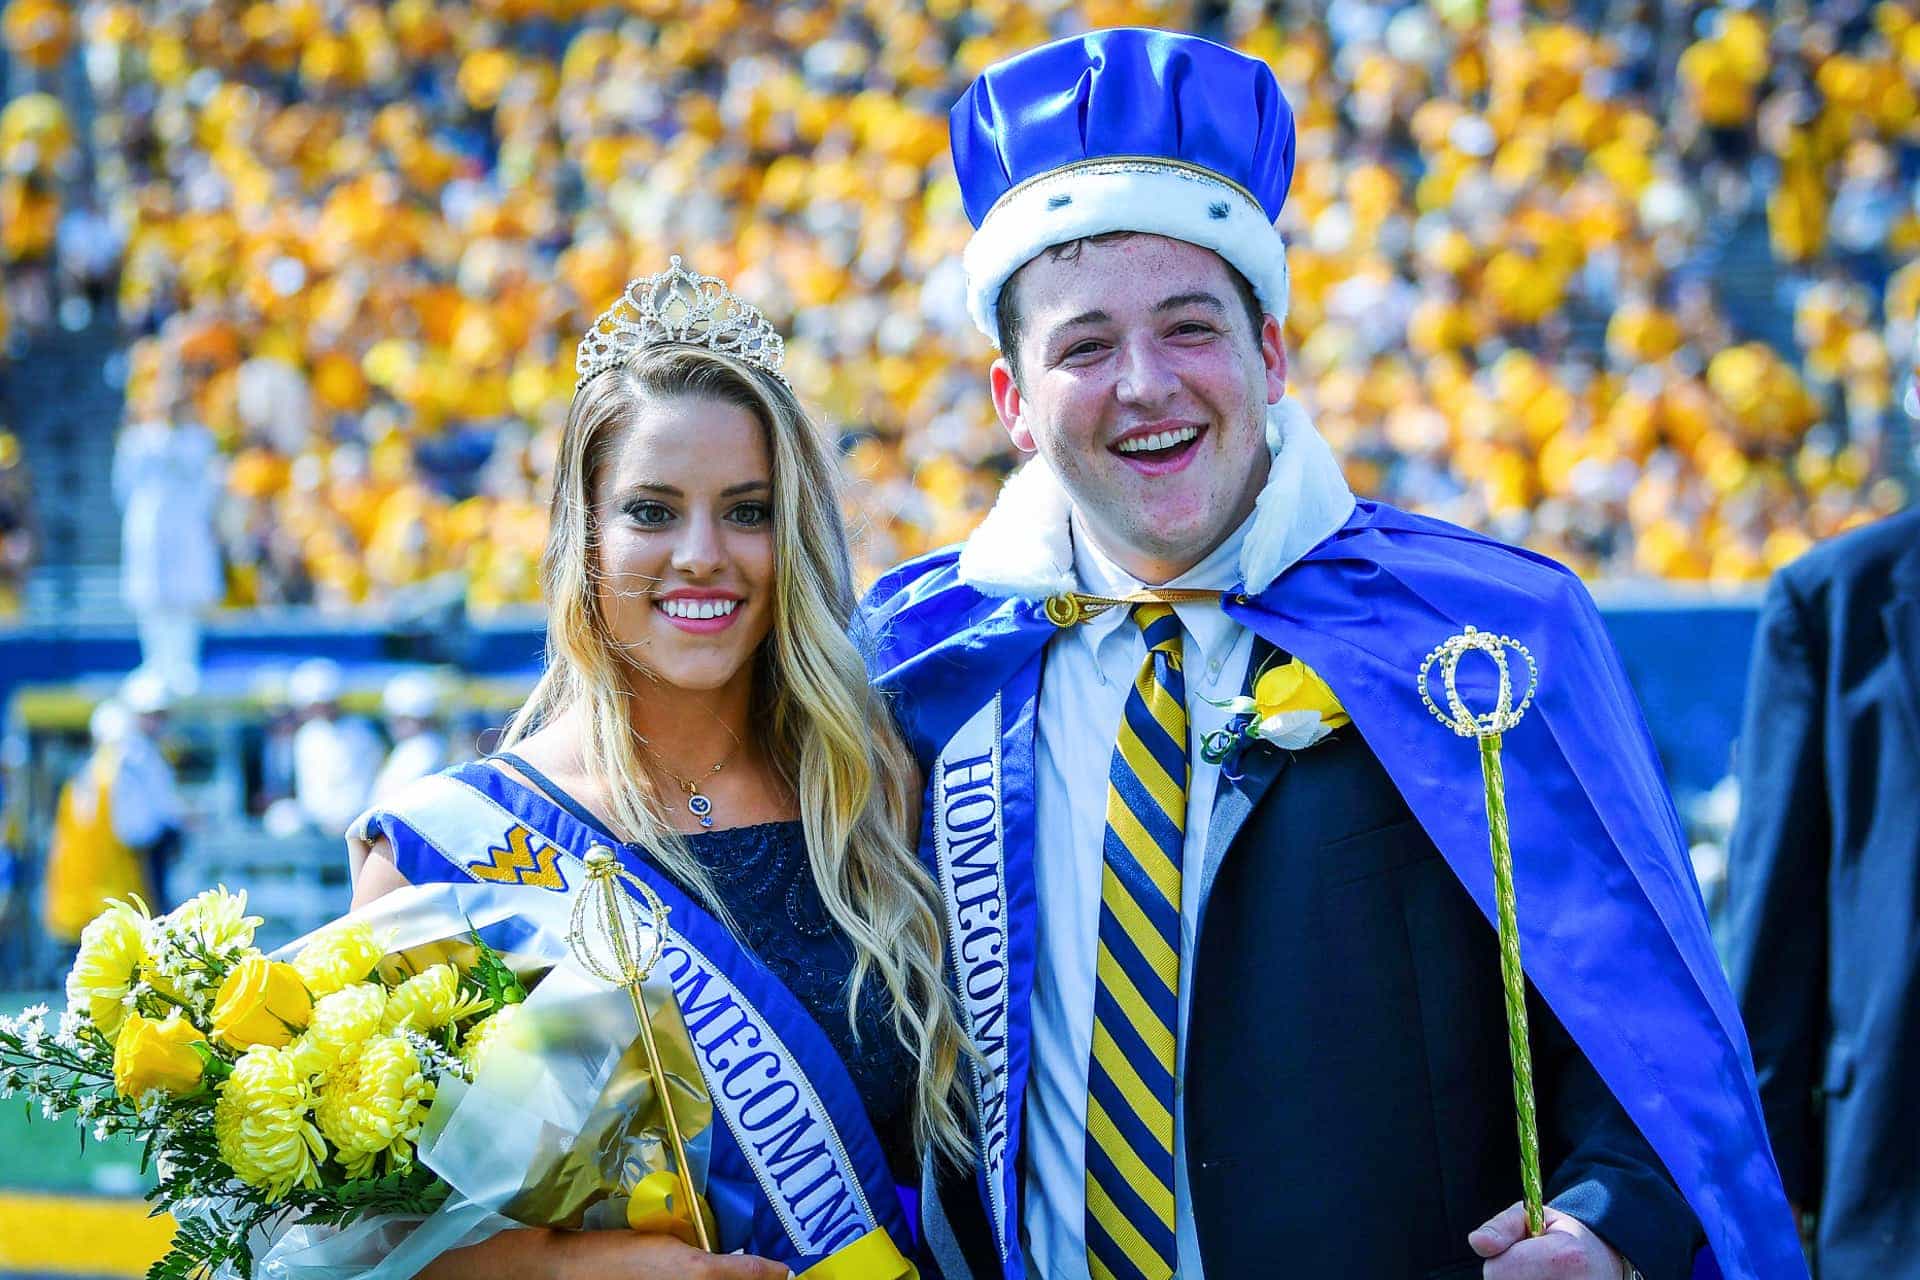 WVU homecoming king and queen